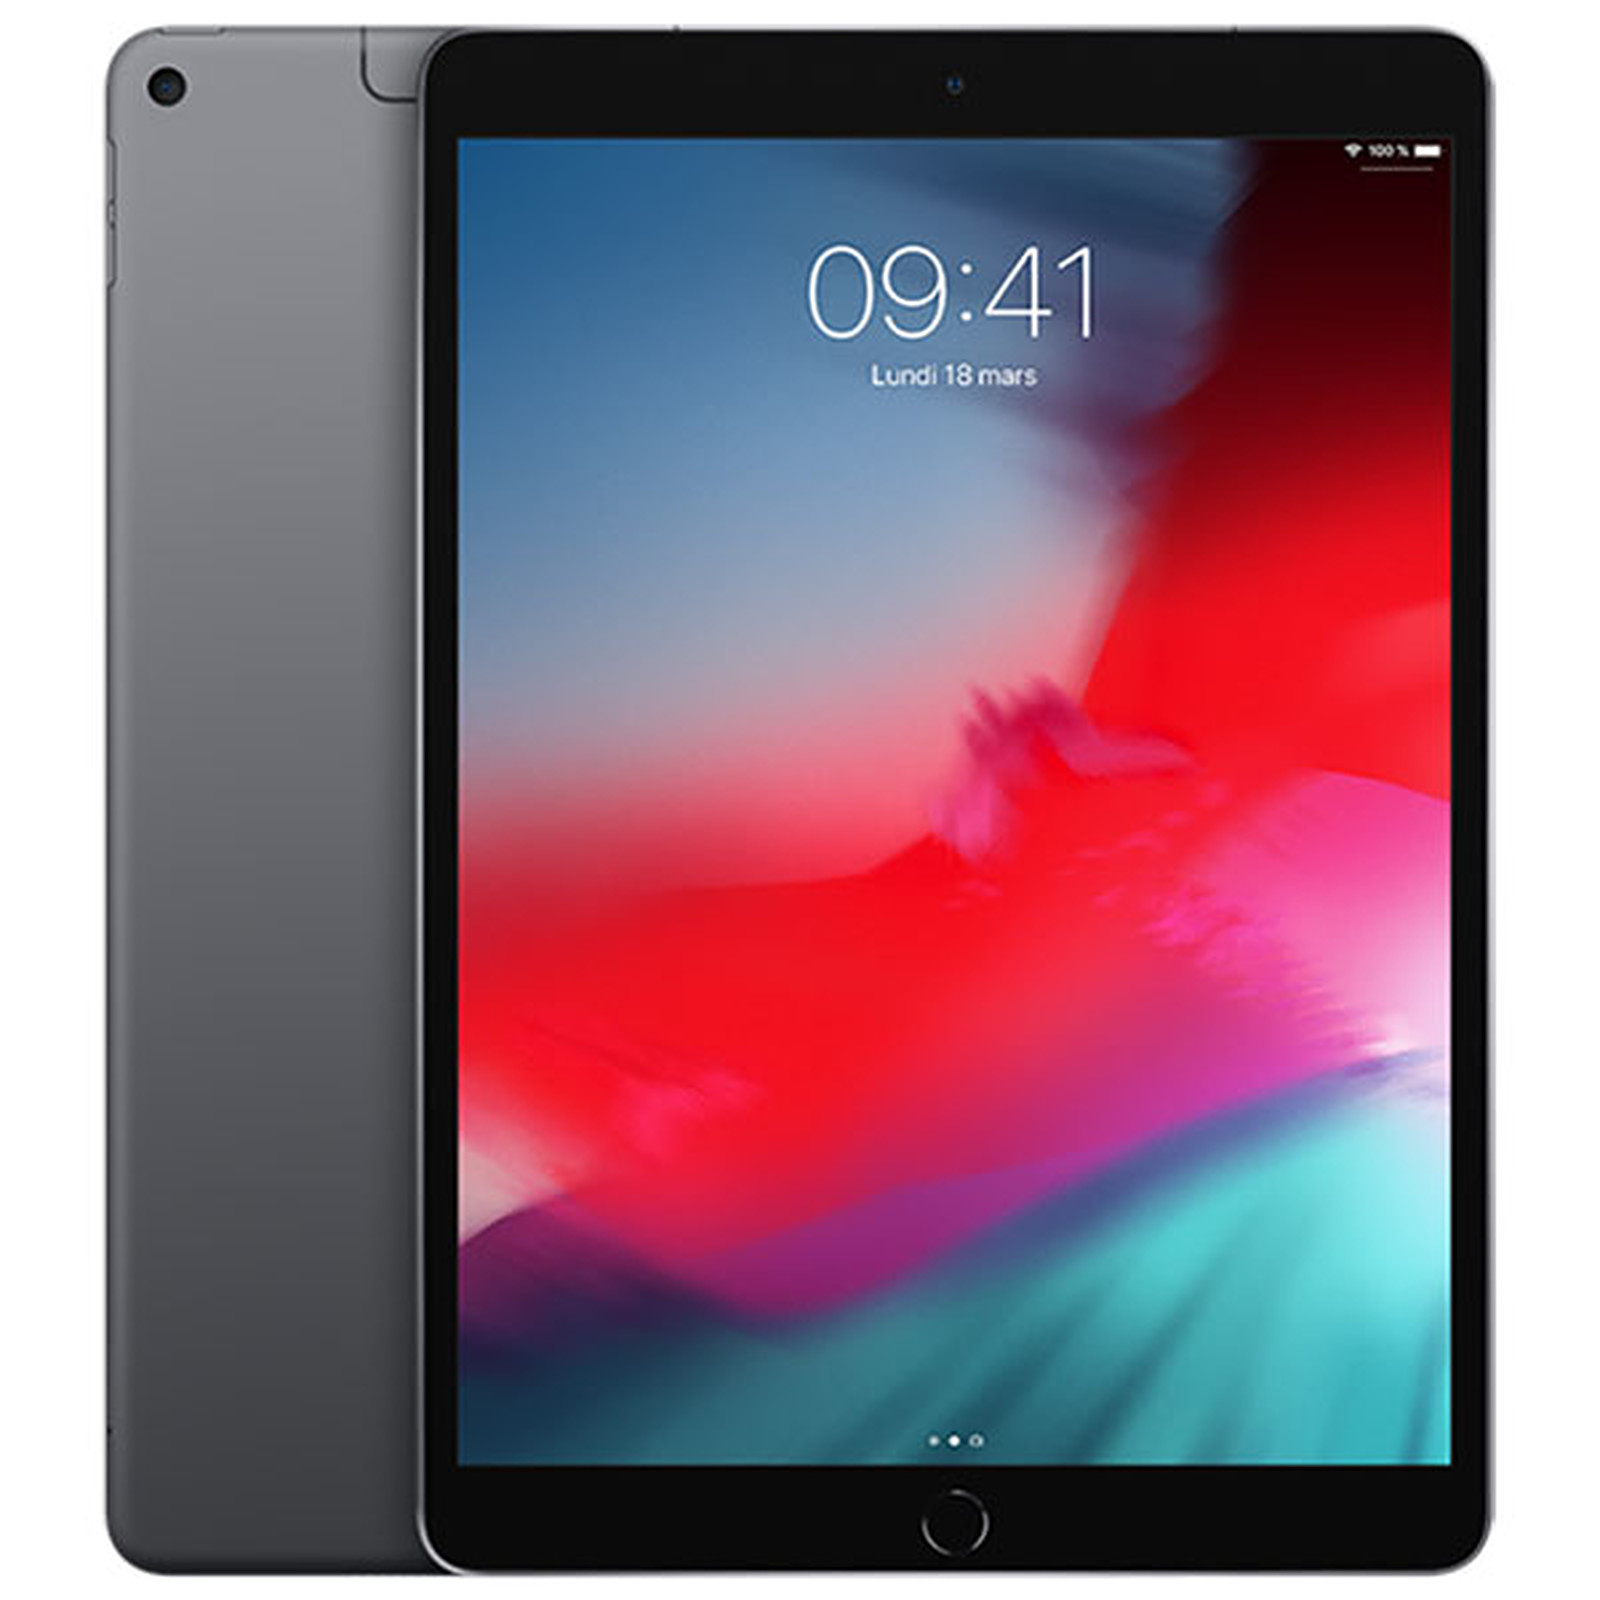 Apple iPad Air (2019) Wi-Fi + Cellular 256 Go Gris Sideral · Reconditionne - Tablette tactile Apple